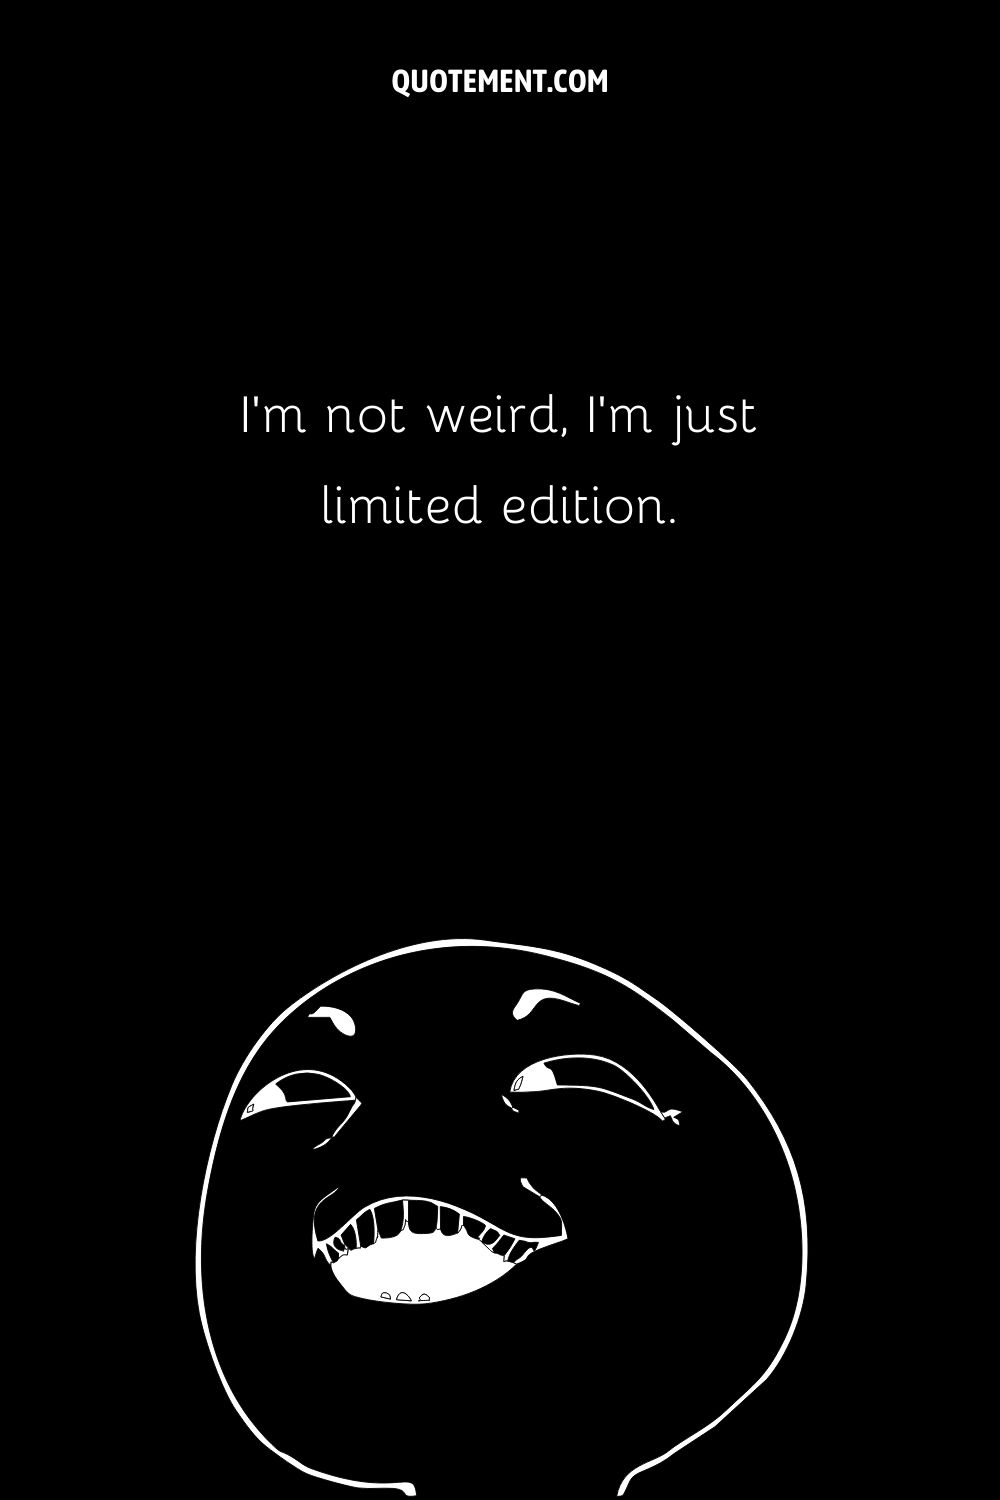 I’m not weird, I’m just limited edition.